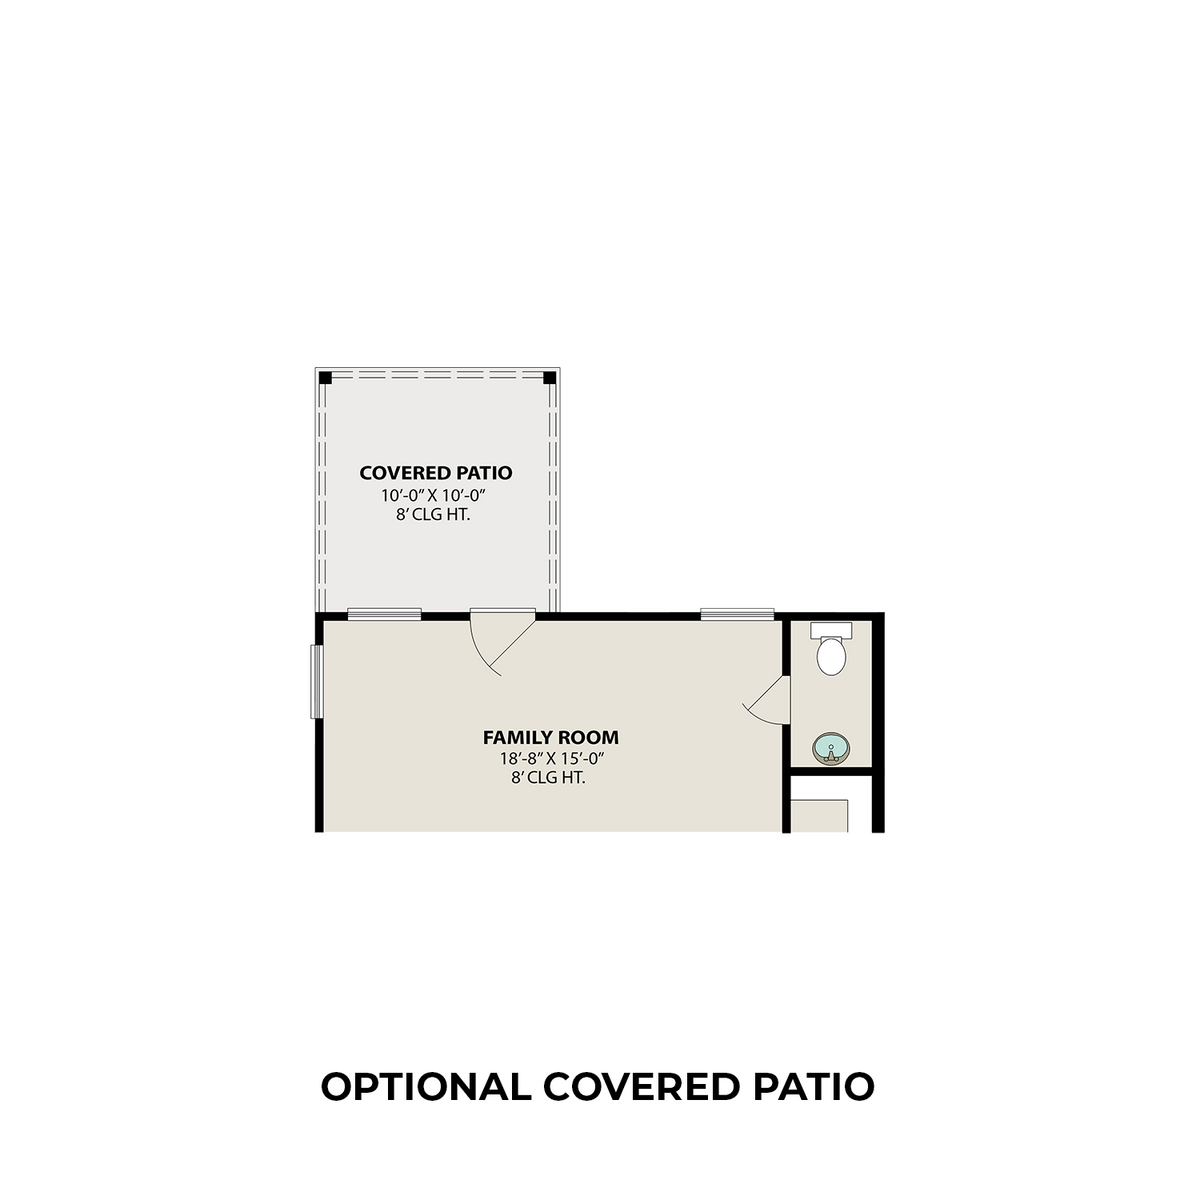 3 - The Lily B floor plan layout for 5239 Shallowhurst Lane in Davidson Homes' Haven at Kieth Harrow community.